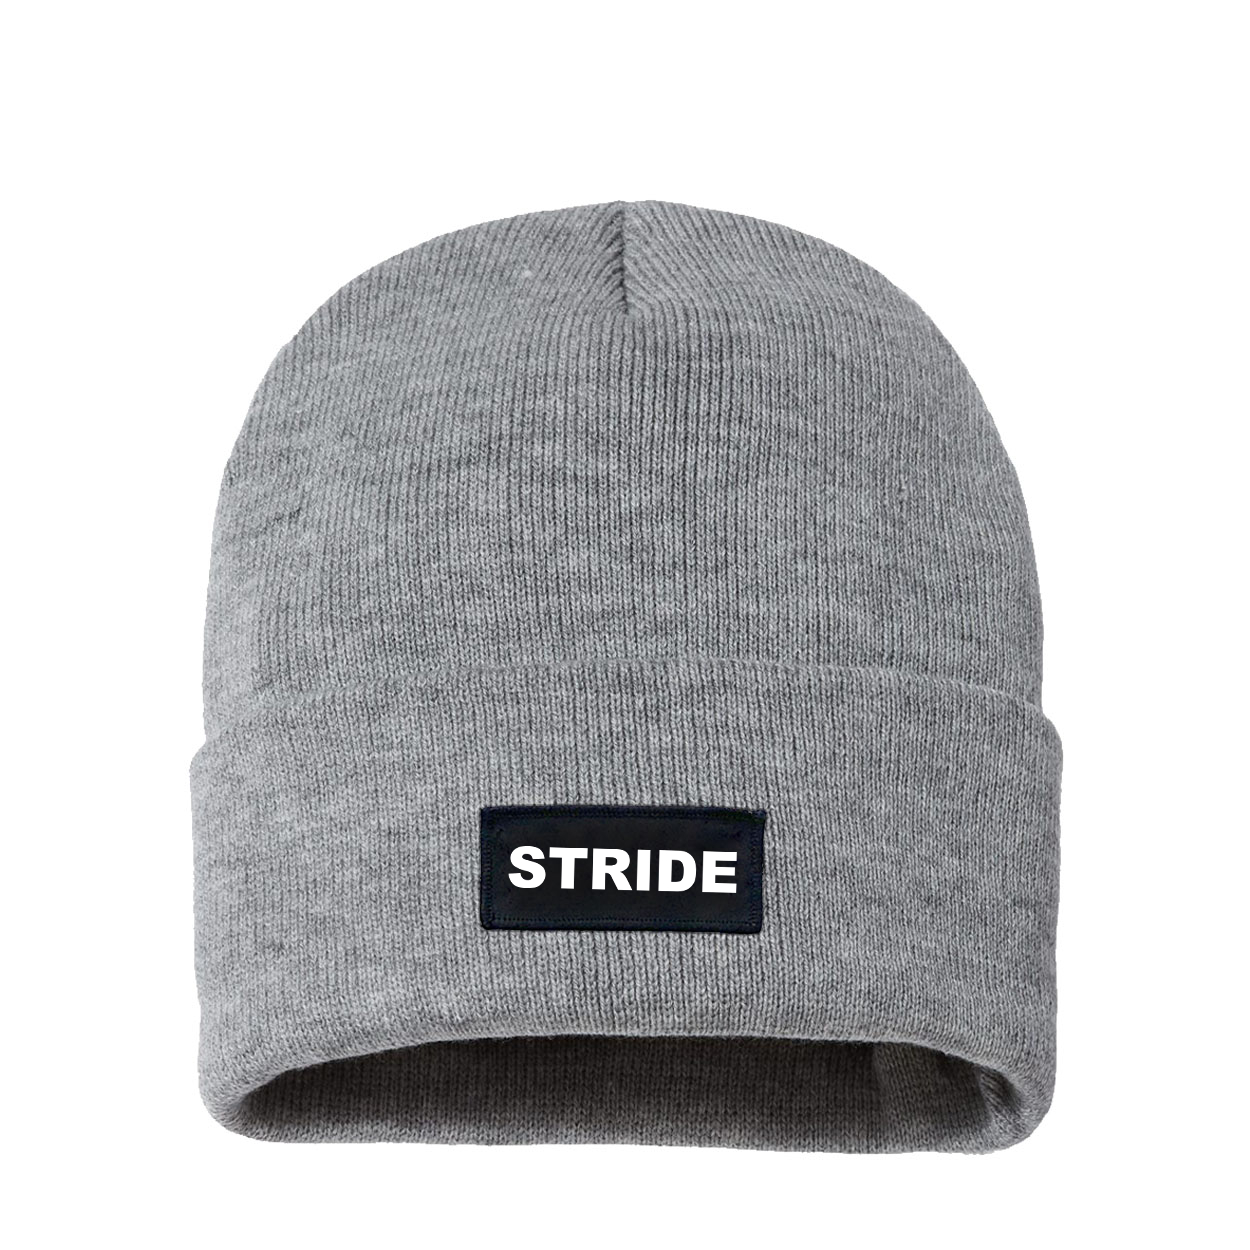 Stride Brand Logo Night Out Woven Patch Sherpa Lined Cuffed Beanie Heather Gray